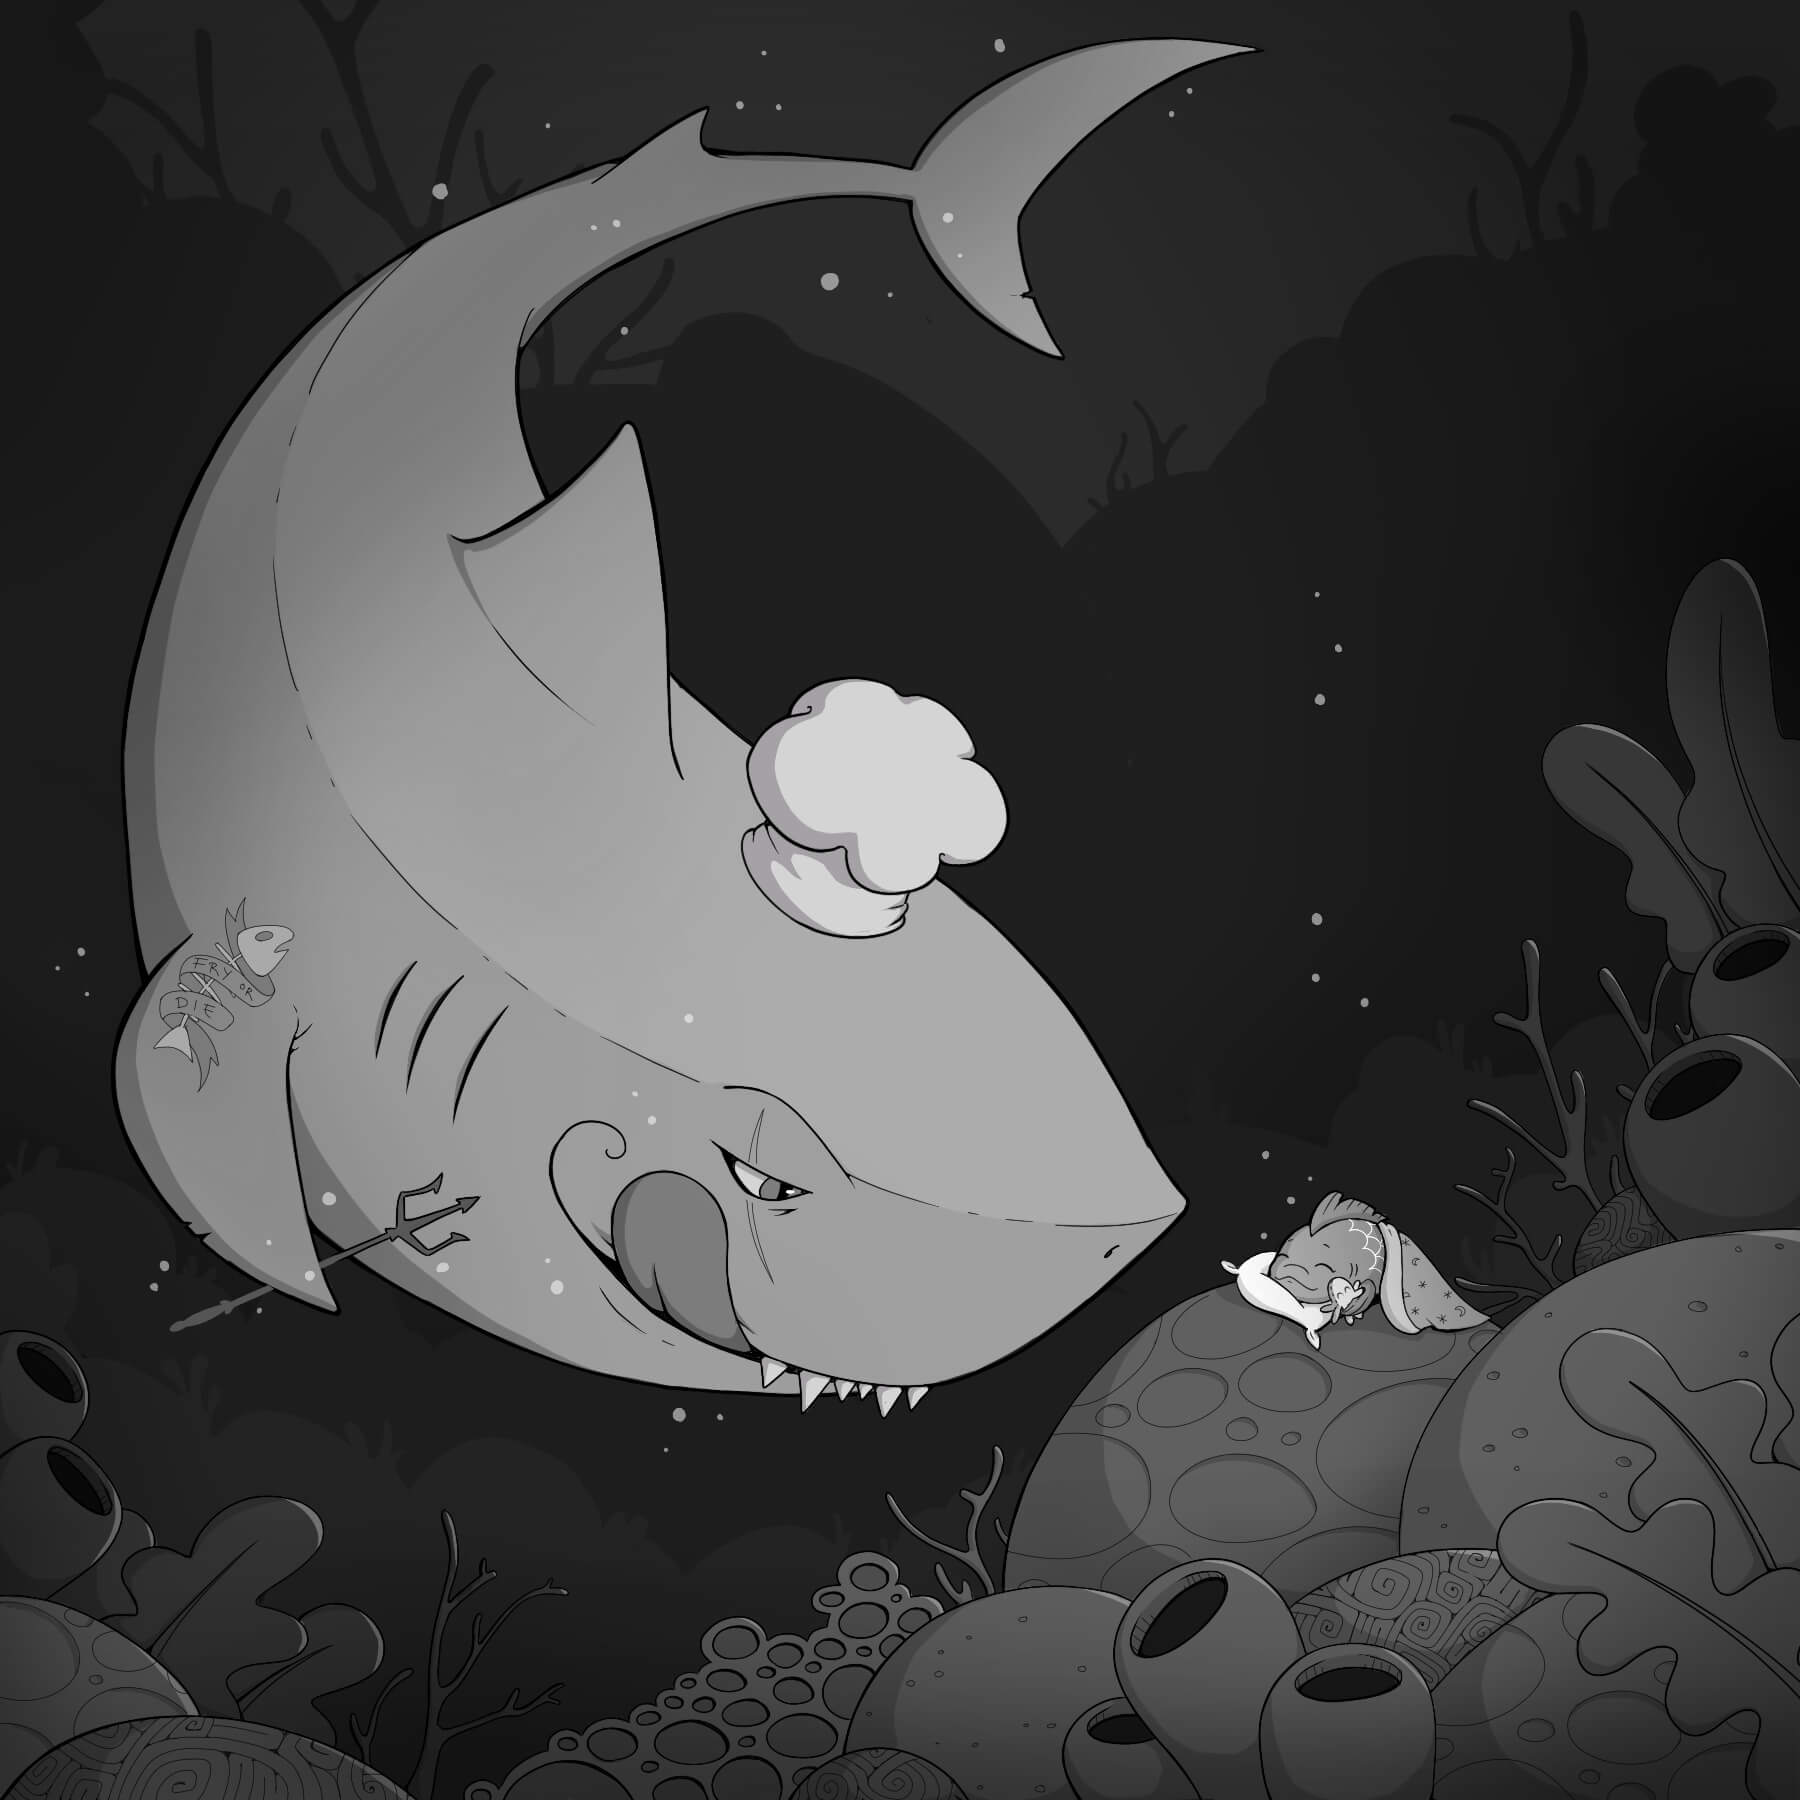 Illustration: An evil-looking chef shark has slotted a tasty fish snuggled in for bedtime.